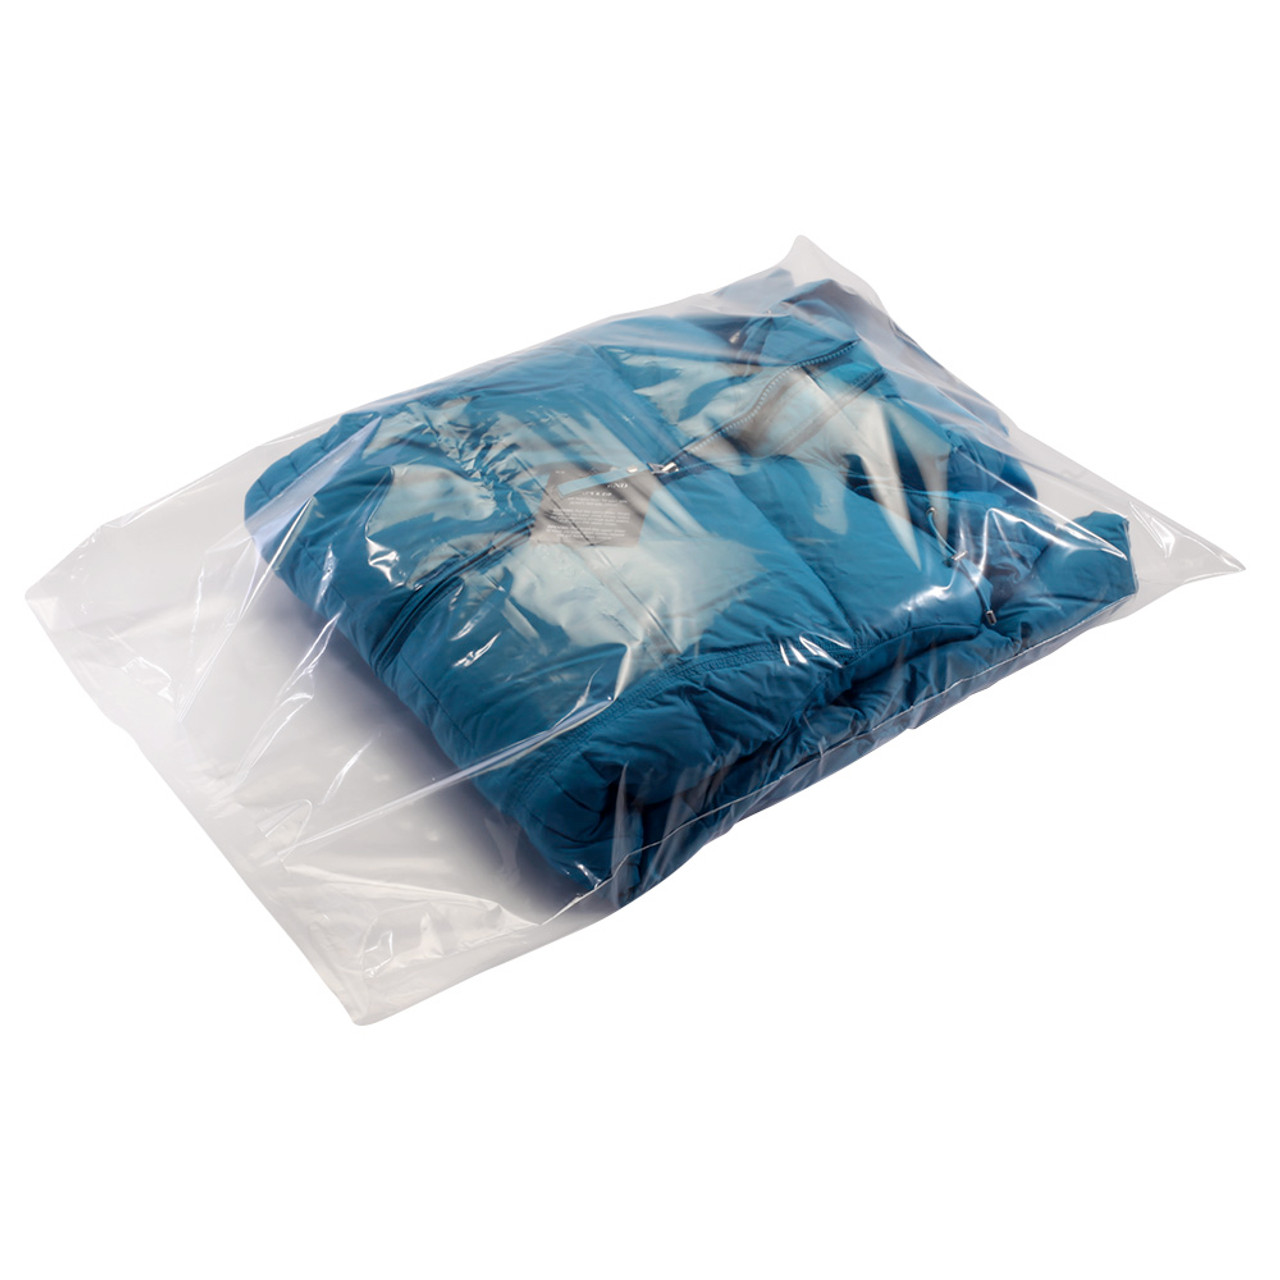 4X5 - 1.5 mil - clear - layflat poly bags - 1000 bags/case